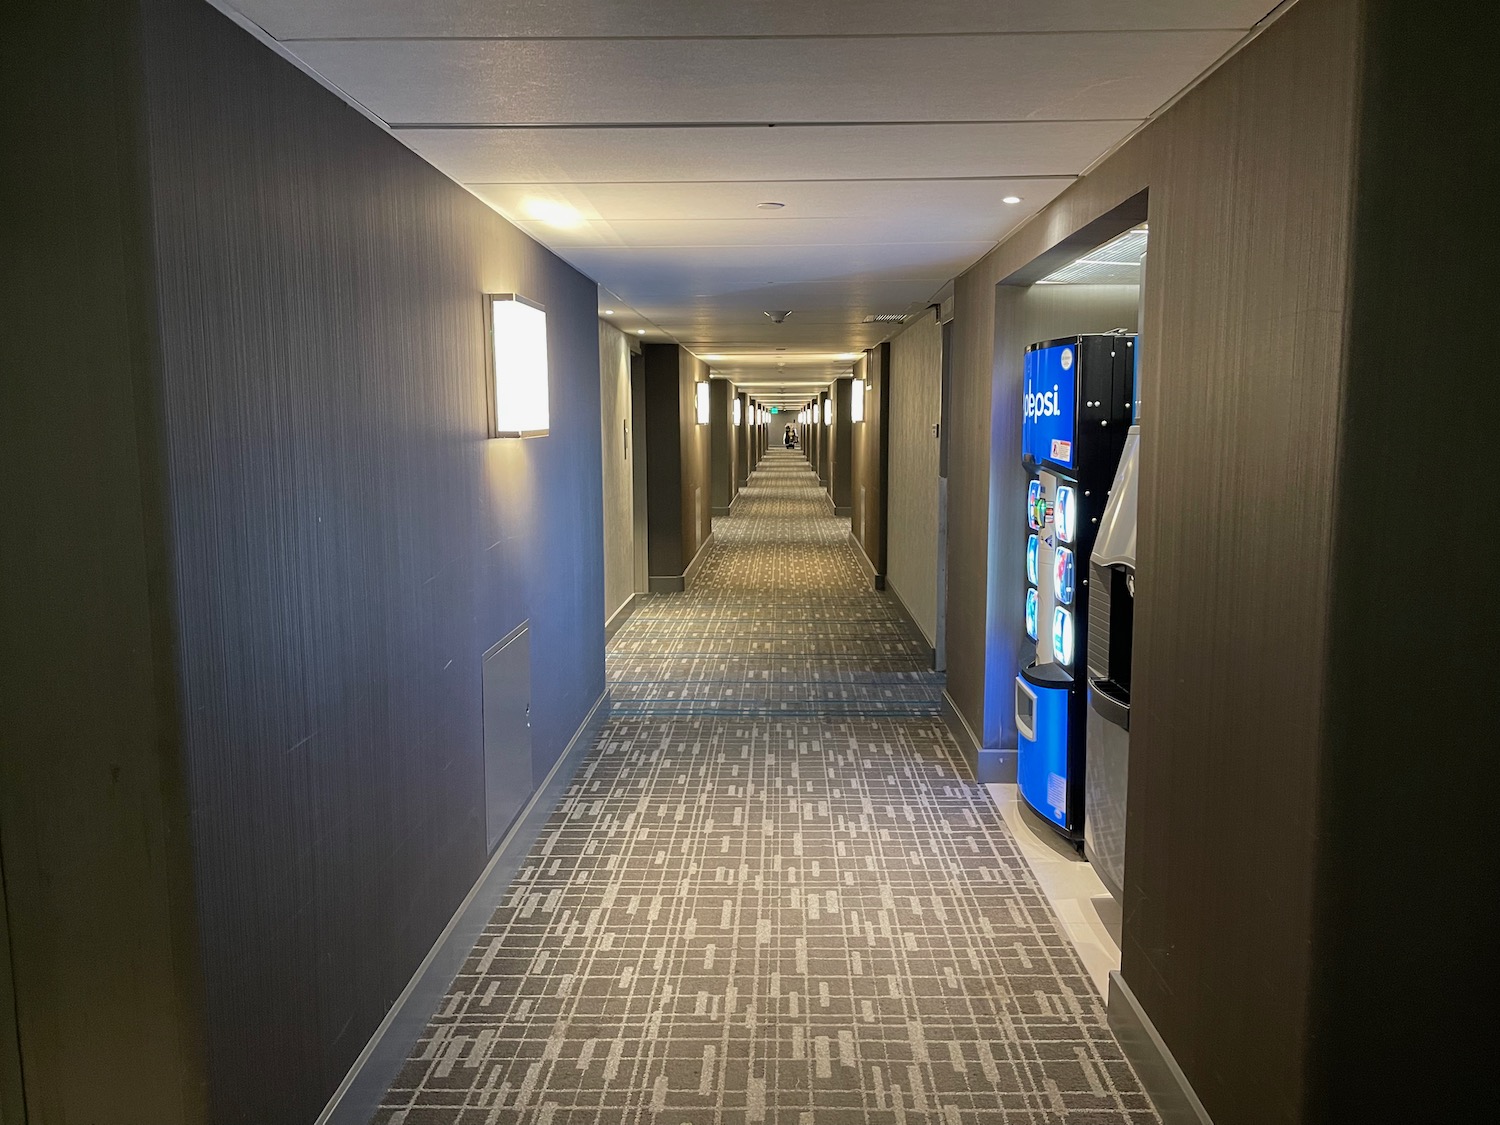 a hallway with a carpeted floor and vending machines